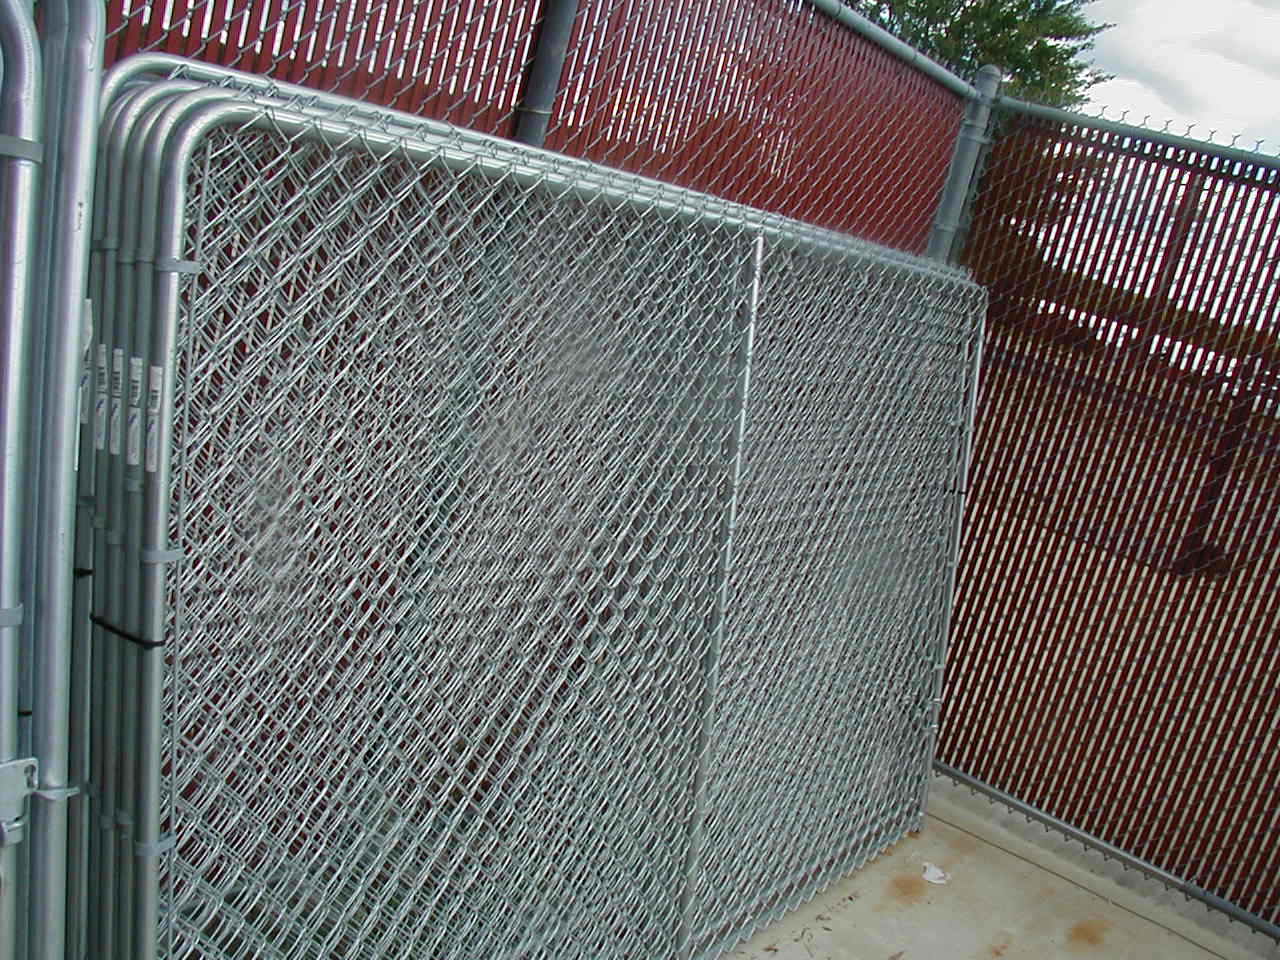 Benefits of Chainlink Fences: Durability and Low Maintenance